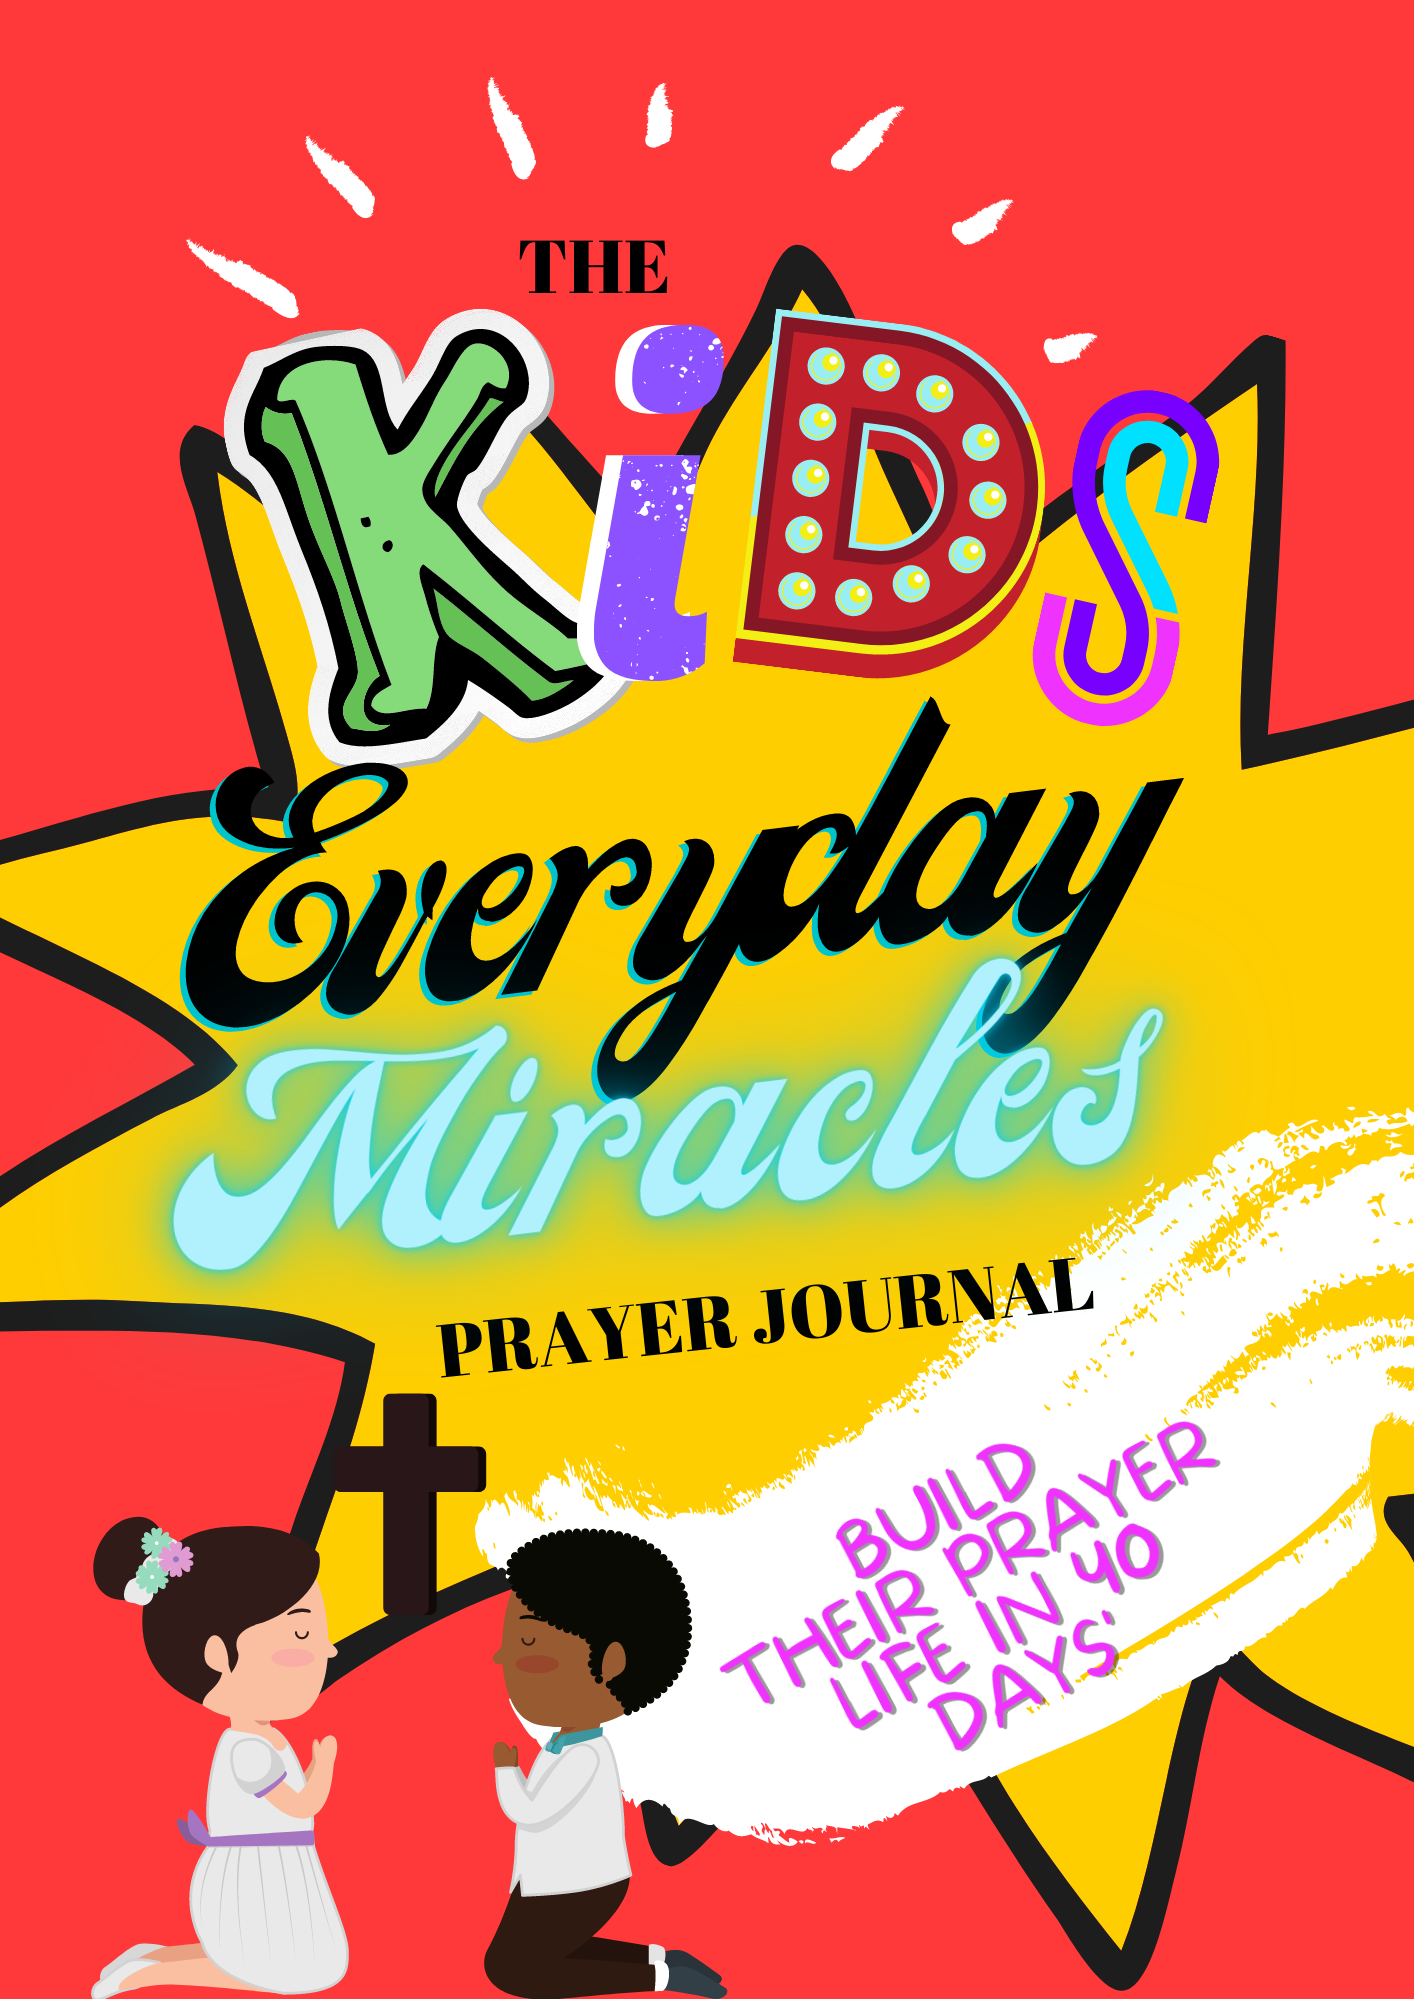 The EveryDay Miracles Prayer Journal for Kids